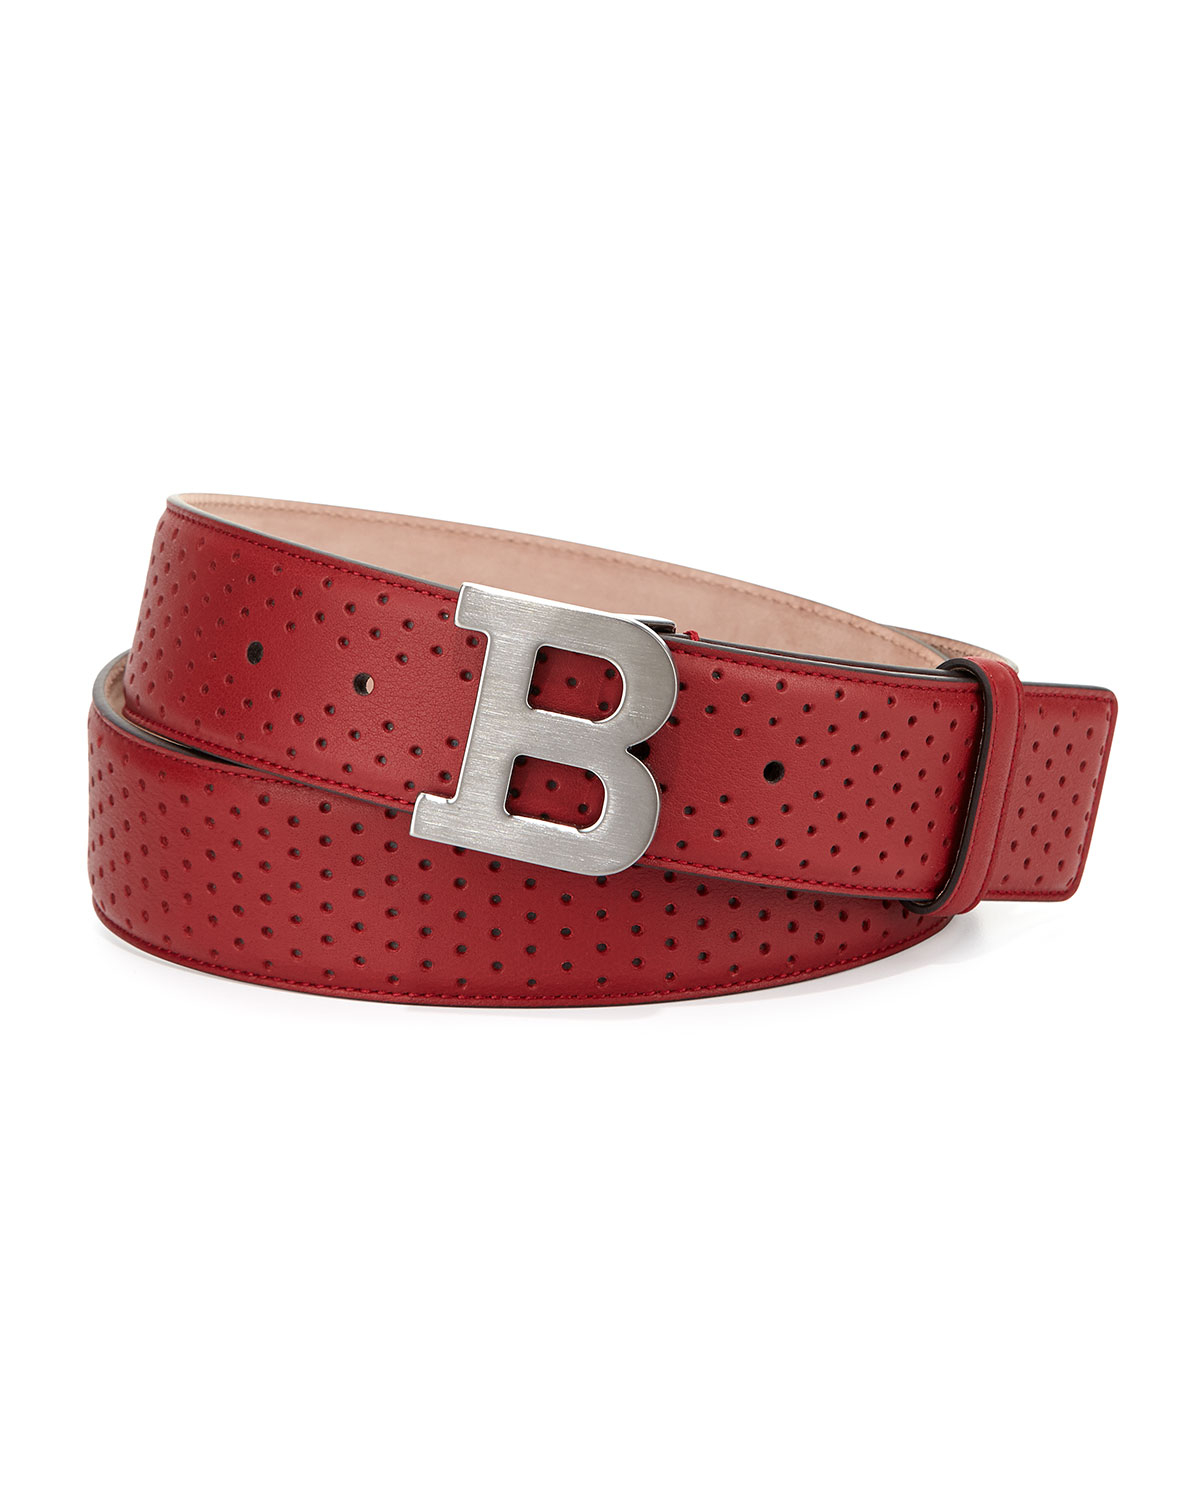 Lyst - Bally Perforated B-buckle Belt in Red for Men